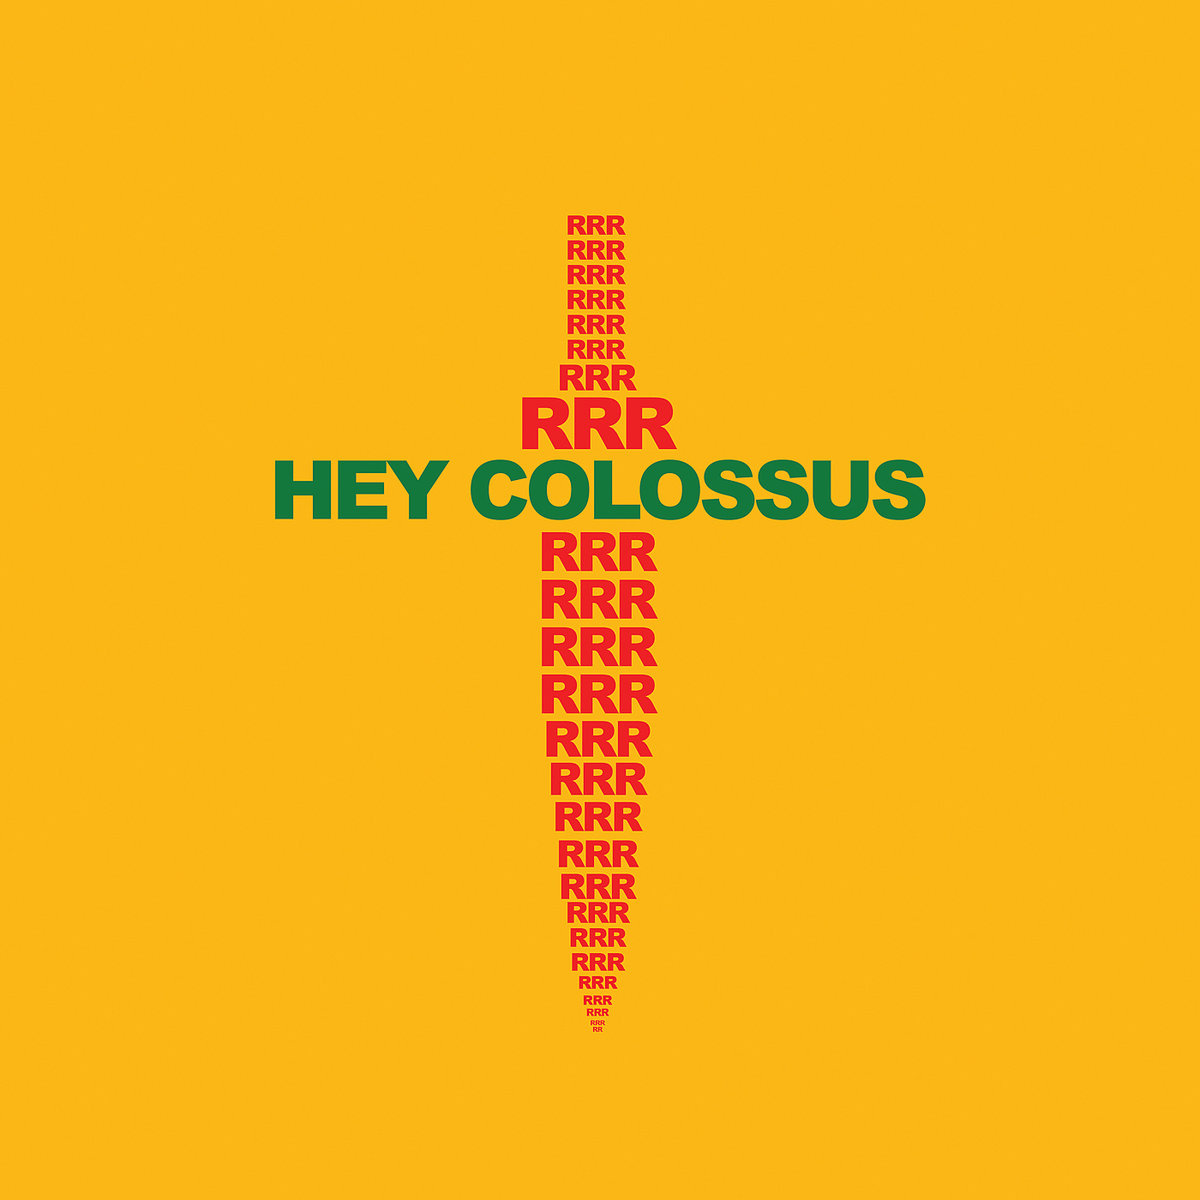 Hey Colossus - RRR (2018 Expanded Edition)